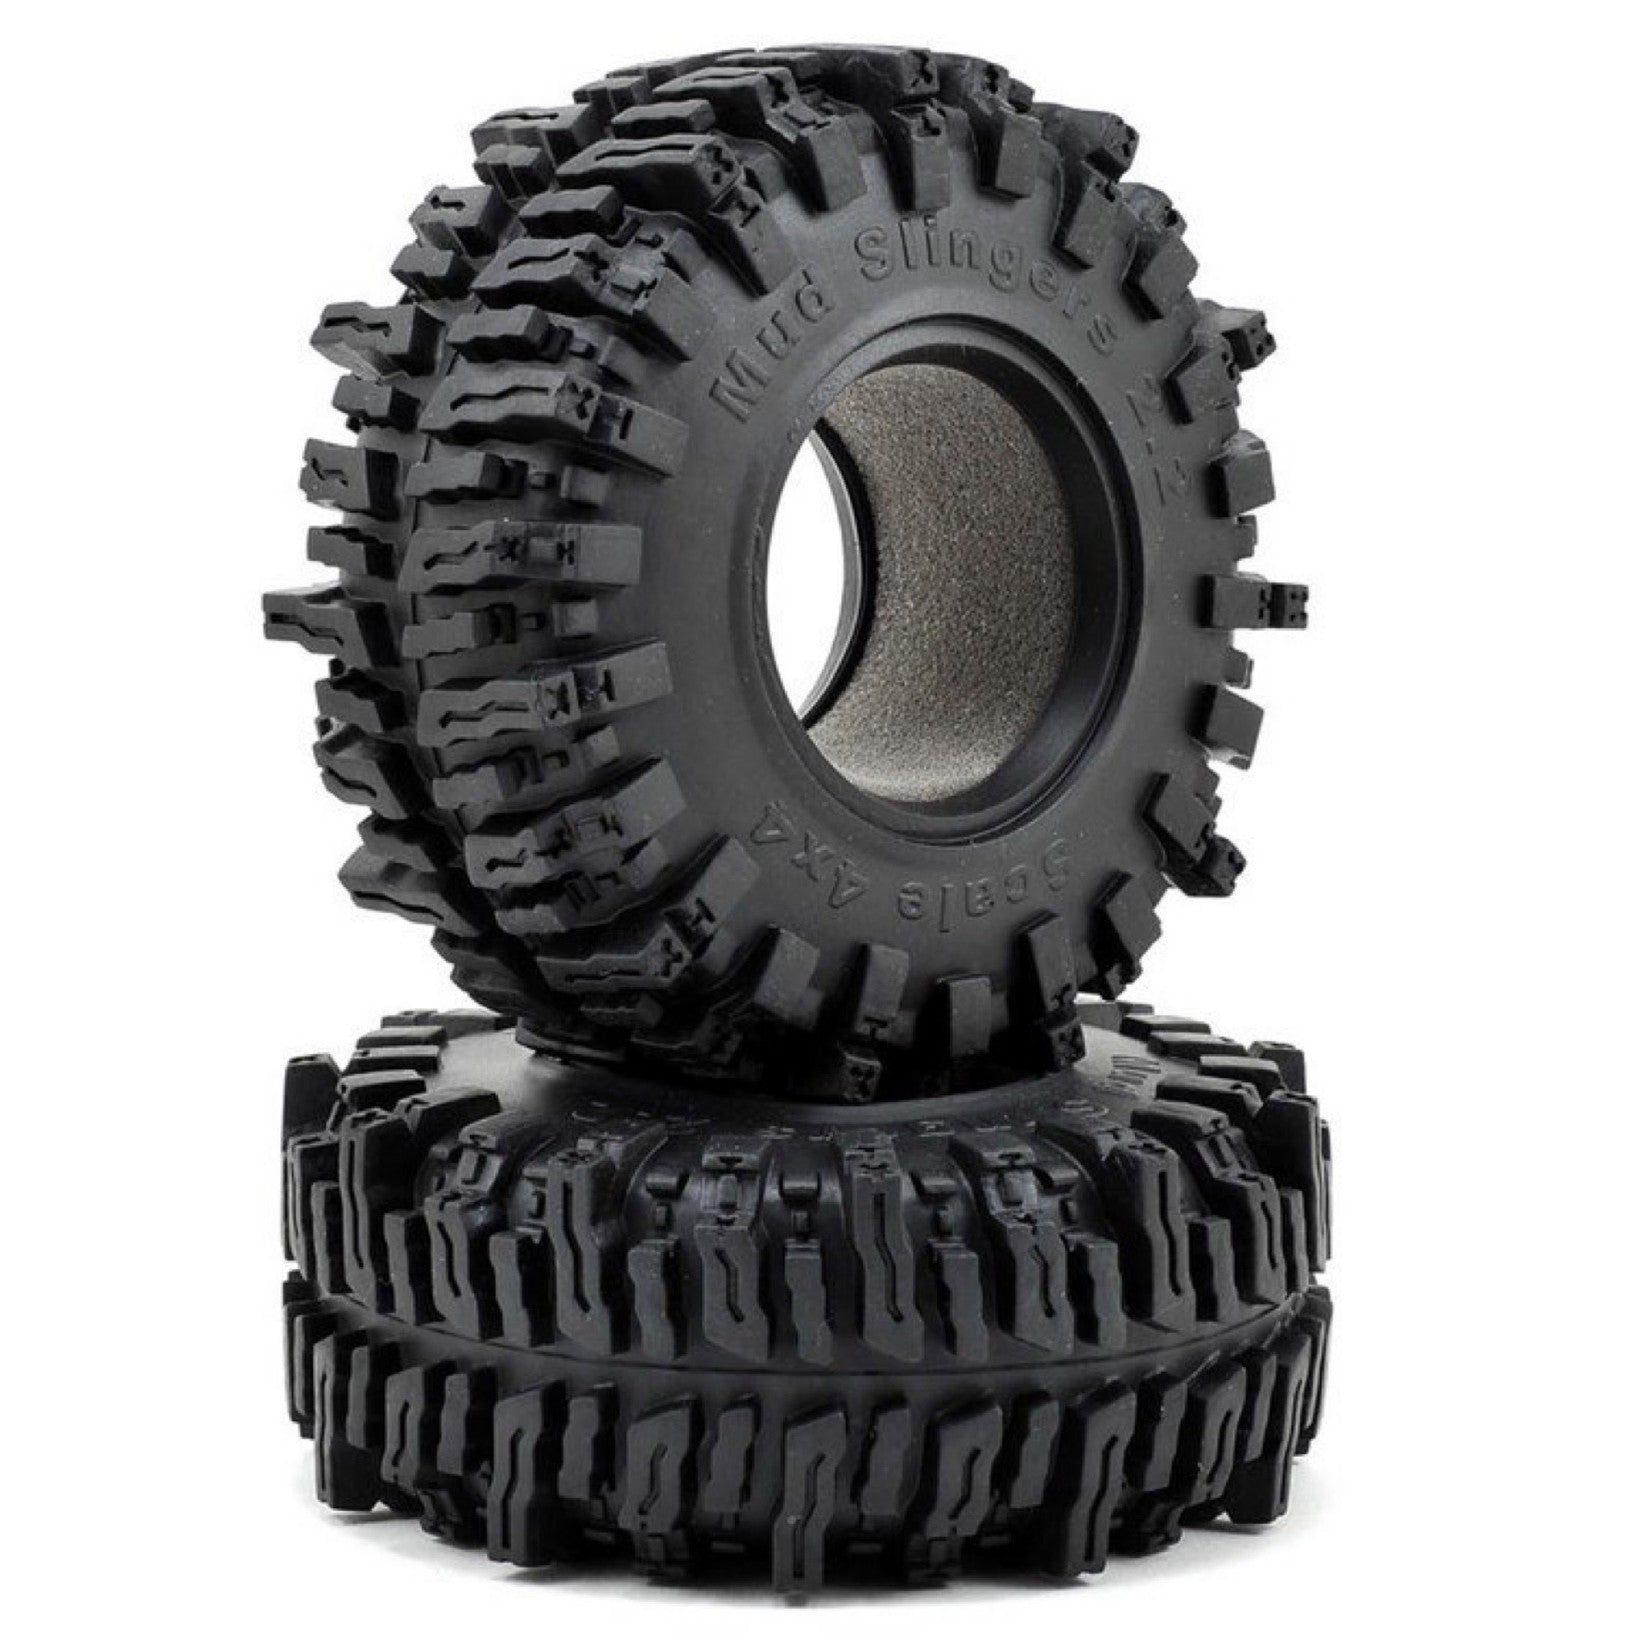 RC4WD Z-T0097 Mud Slingers 2.2" Soft Edition Tires (2)